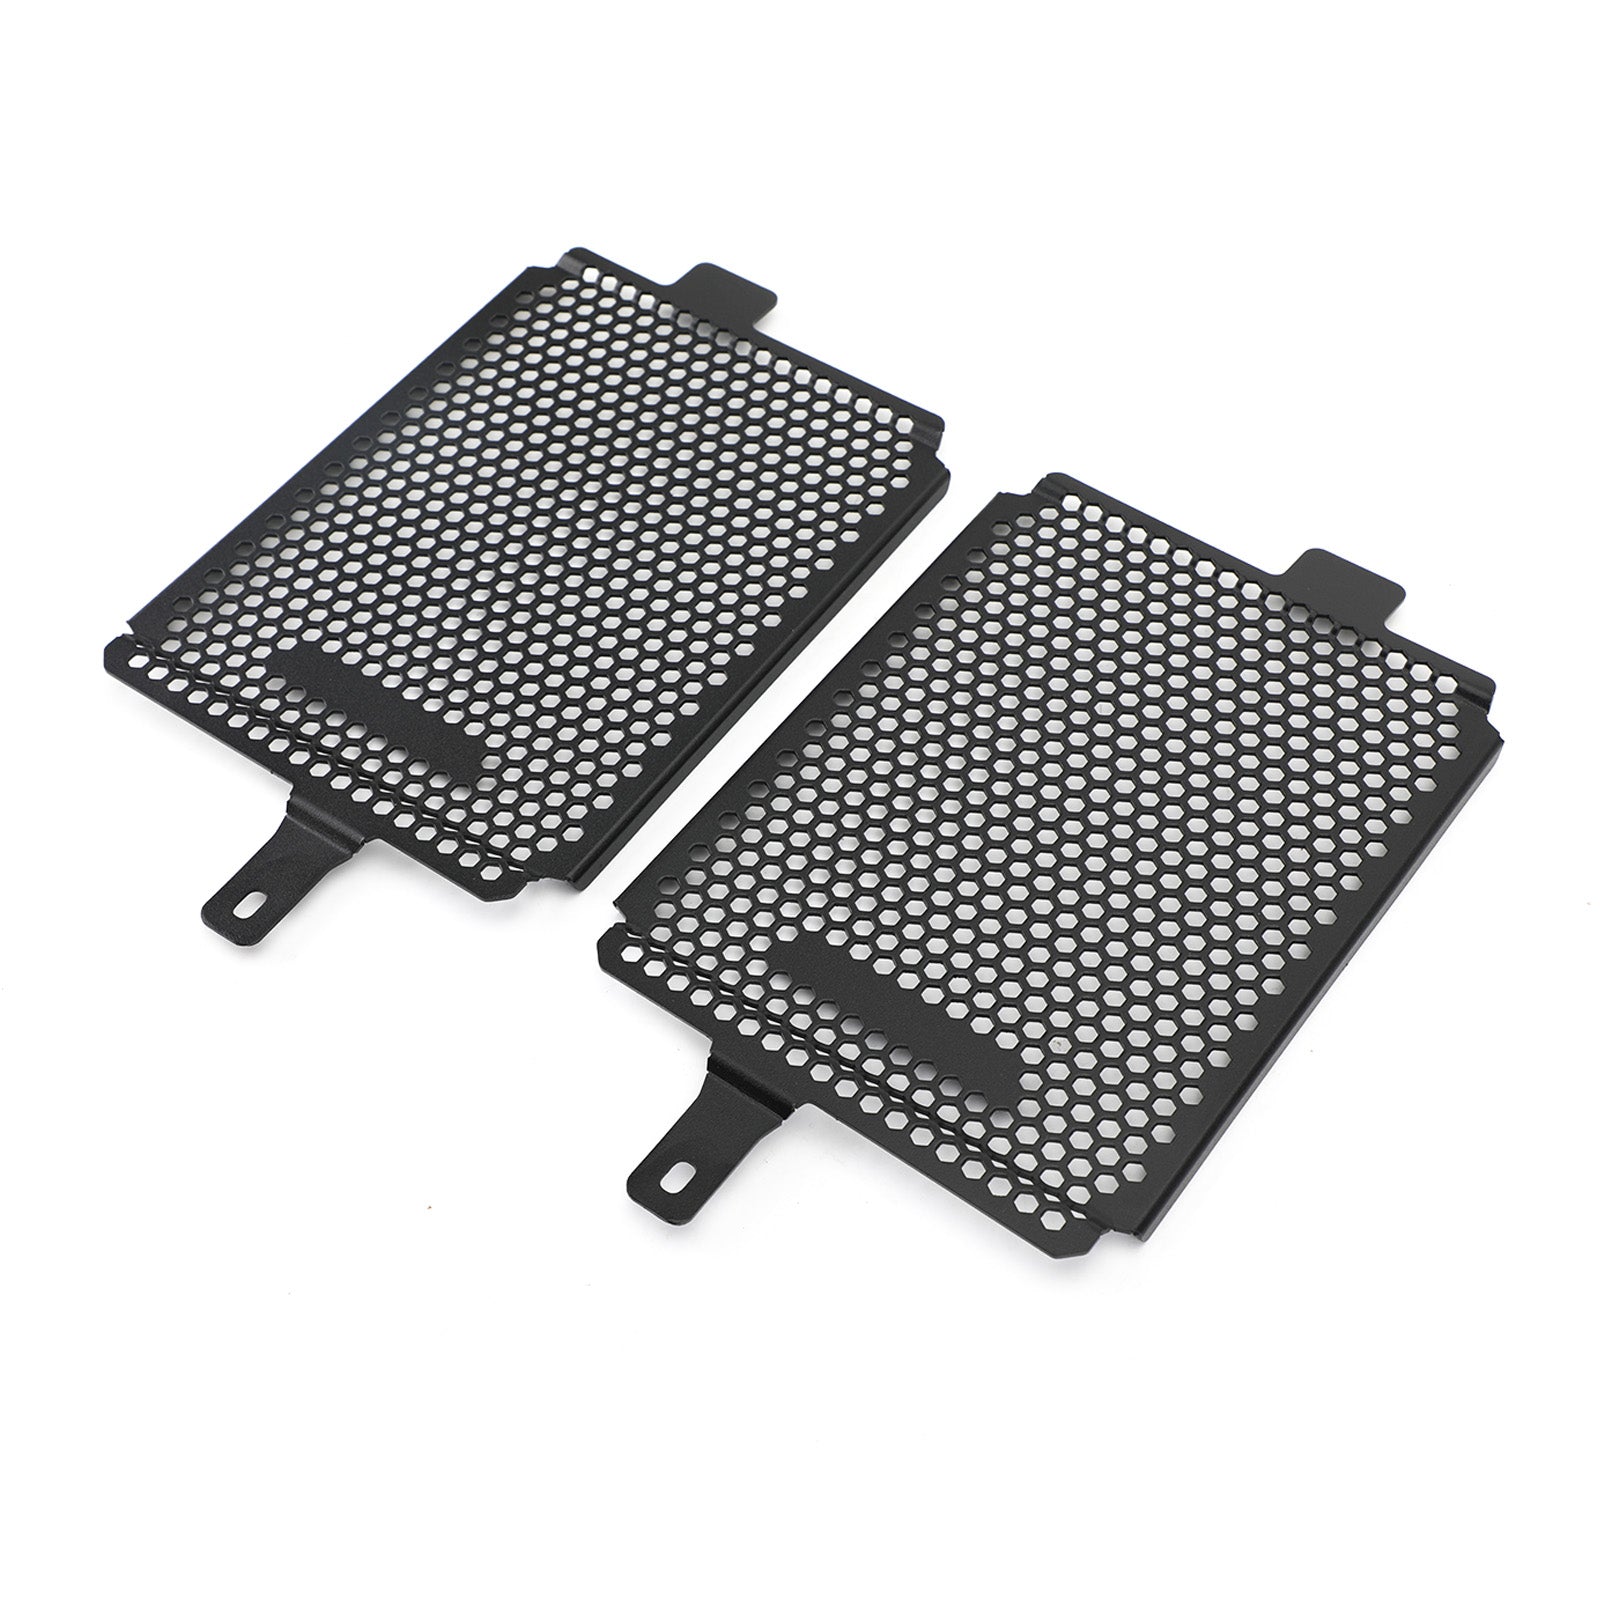 R1250GS Exclusive TE 2019+ Radiator Guard Protector Grill Cover Black